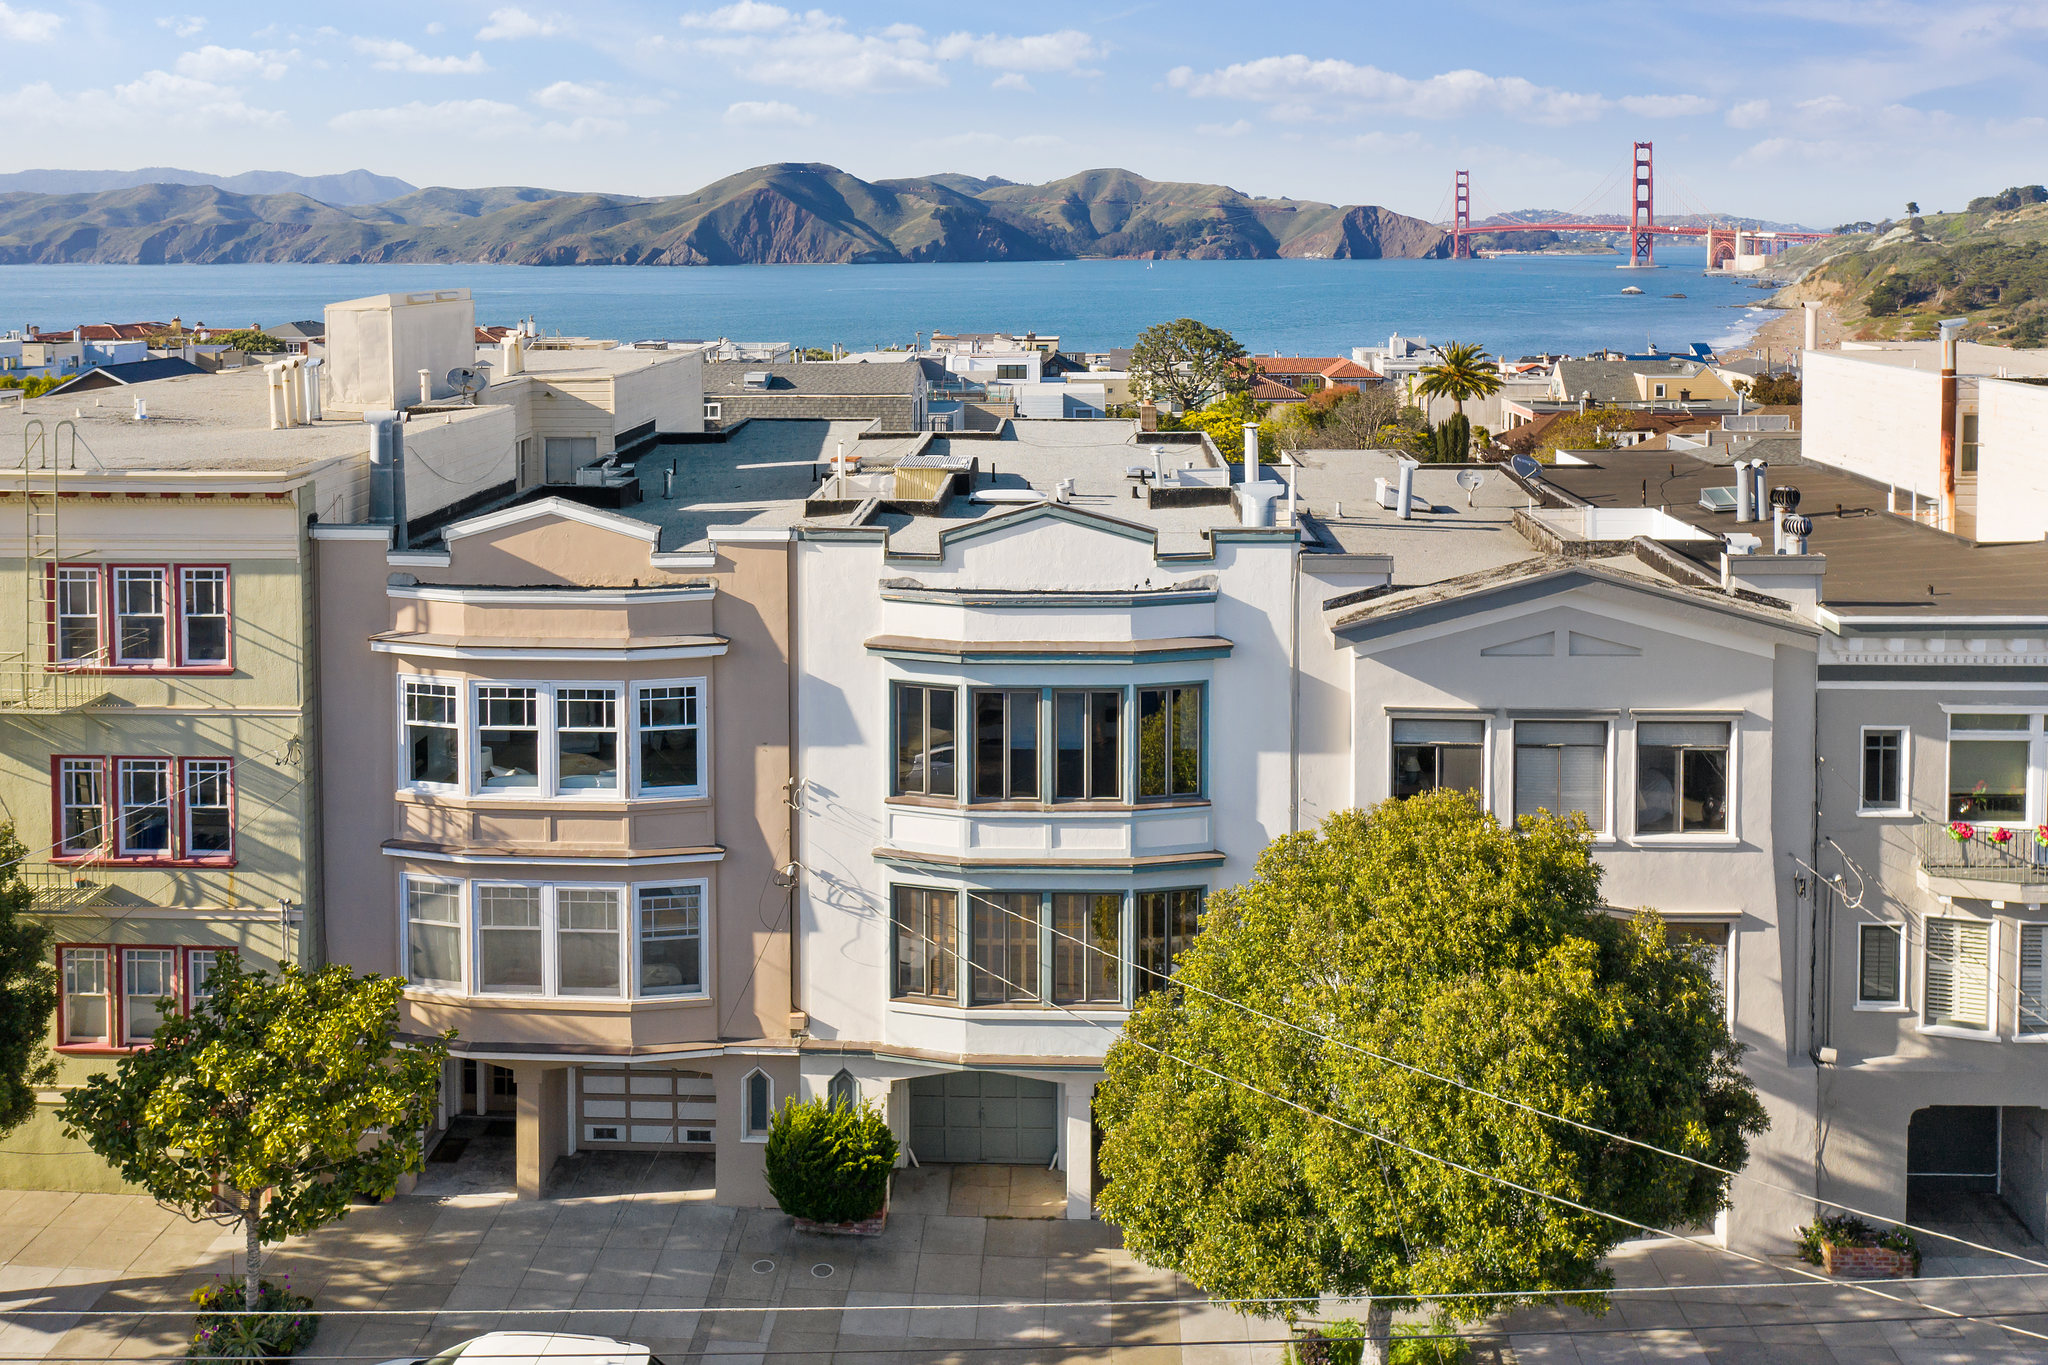 Property Photo: Exterior View of 2538-40 Lake Street, featuring the San Francisco Bay and the Golden Gate Bridge